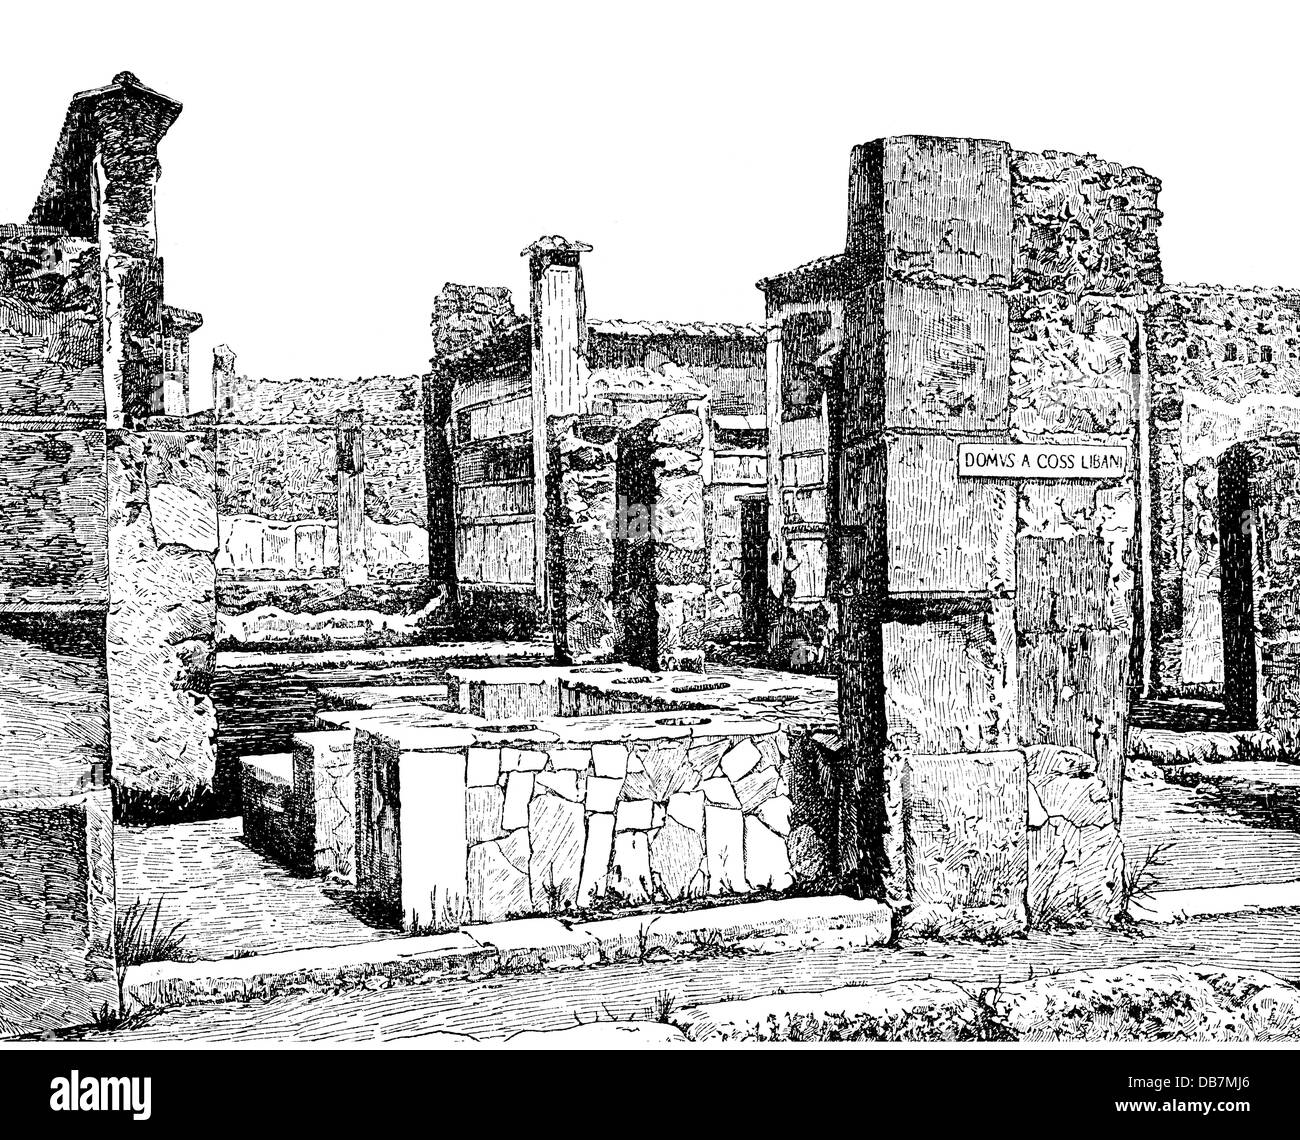 ancient world, Roman Empire, remains of a Roman cookshop, Pompeii, wood engraving, 19th century, 19th century, graphic, graphics, ancient world, ancient times, Rome, gastronomy, kitchen, kitchens, cookshop, light meal, night snack, cook, cooking, boil, boiling, boiled, food, ruin, ruins, archeology, archaeology, historic, historical, ancient world, Additional-Rights-Clearences-Not Available Stock Photo